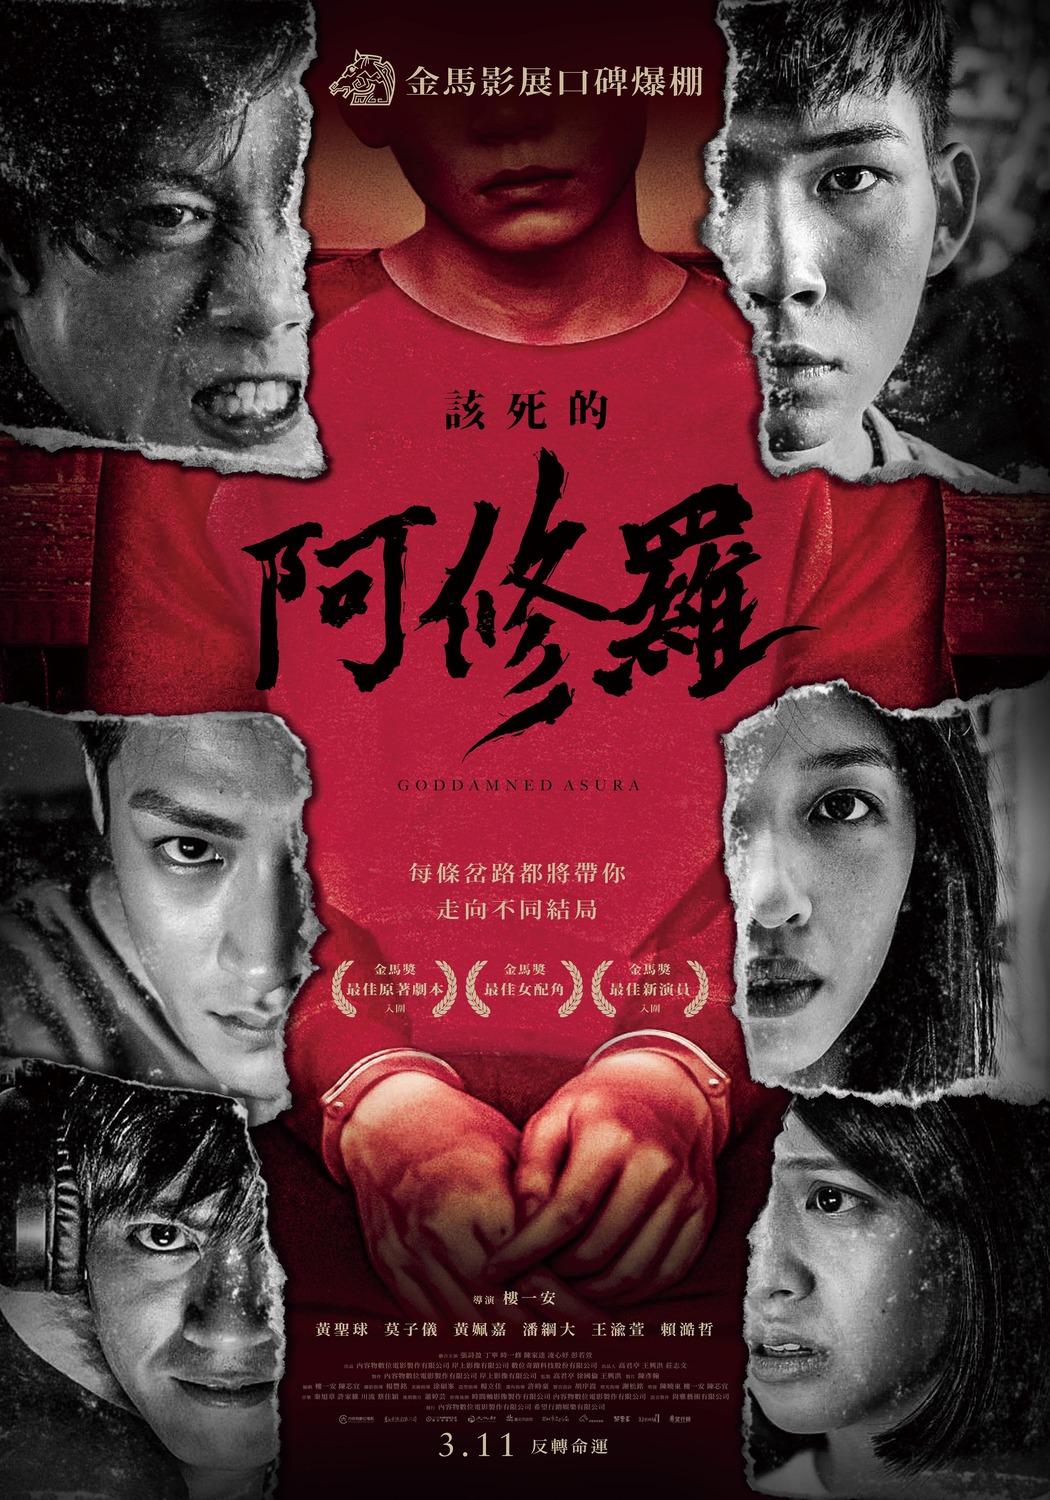 Extra Large Movie Poster Image for Gai si de a xiu luo (#1 of 2)